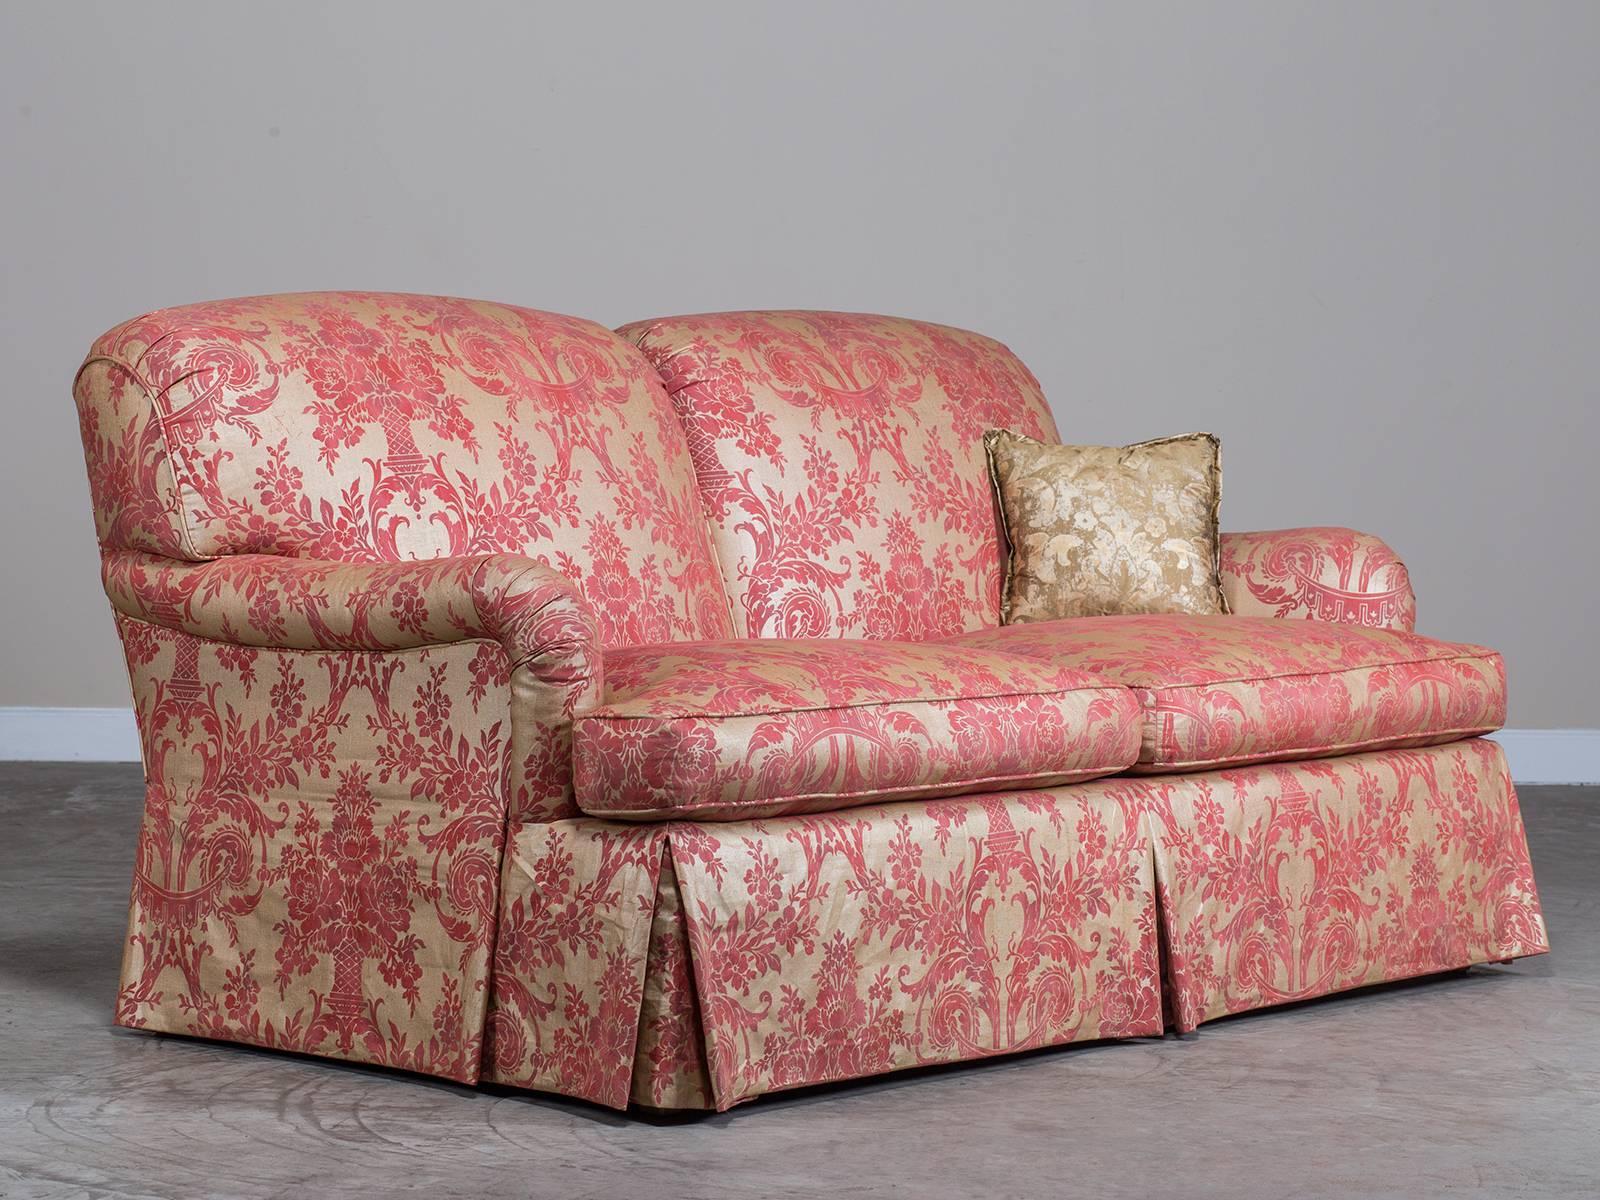 Receive our new selections direct from 1stdibs by email each week. Please click follow dealer below and see them first!

The sheer beauty of Fortuny fabric is shown to exceptional advantage here in this pair of custom made sofas. Fortuny, the